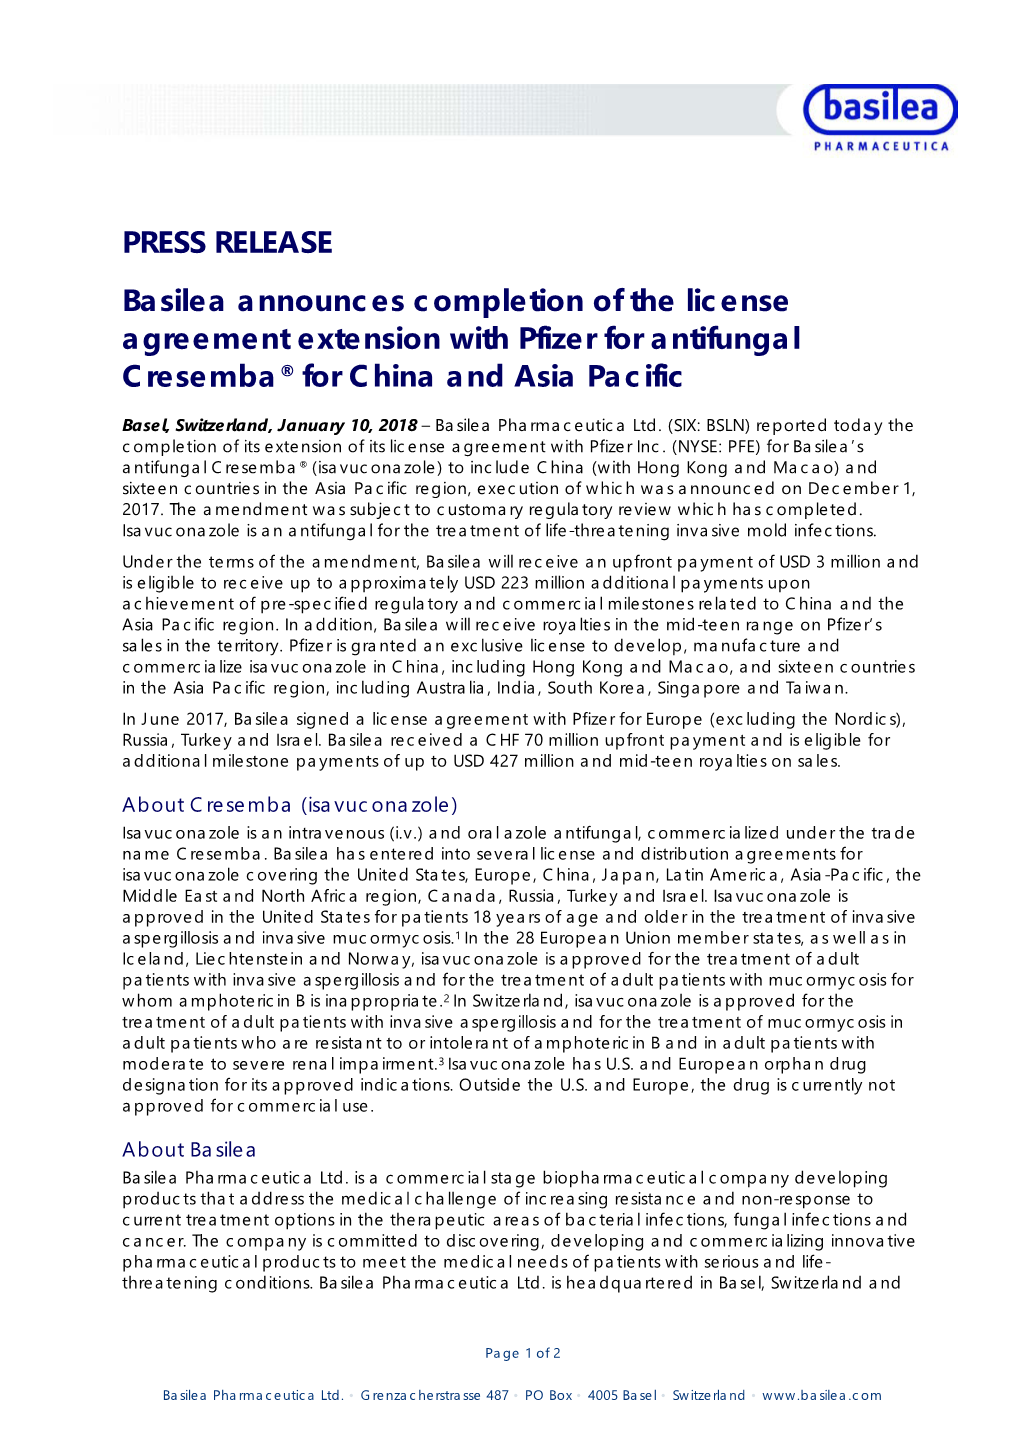 PRESS RELEASE Basilea Announces Completion of the License Agreement Extension with Pfizer for Antifungal Cresemba® for China and Asia Pacific